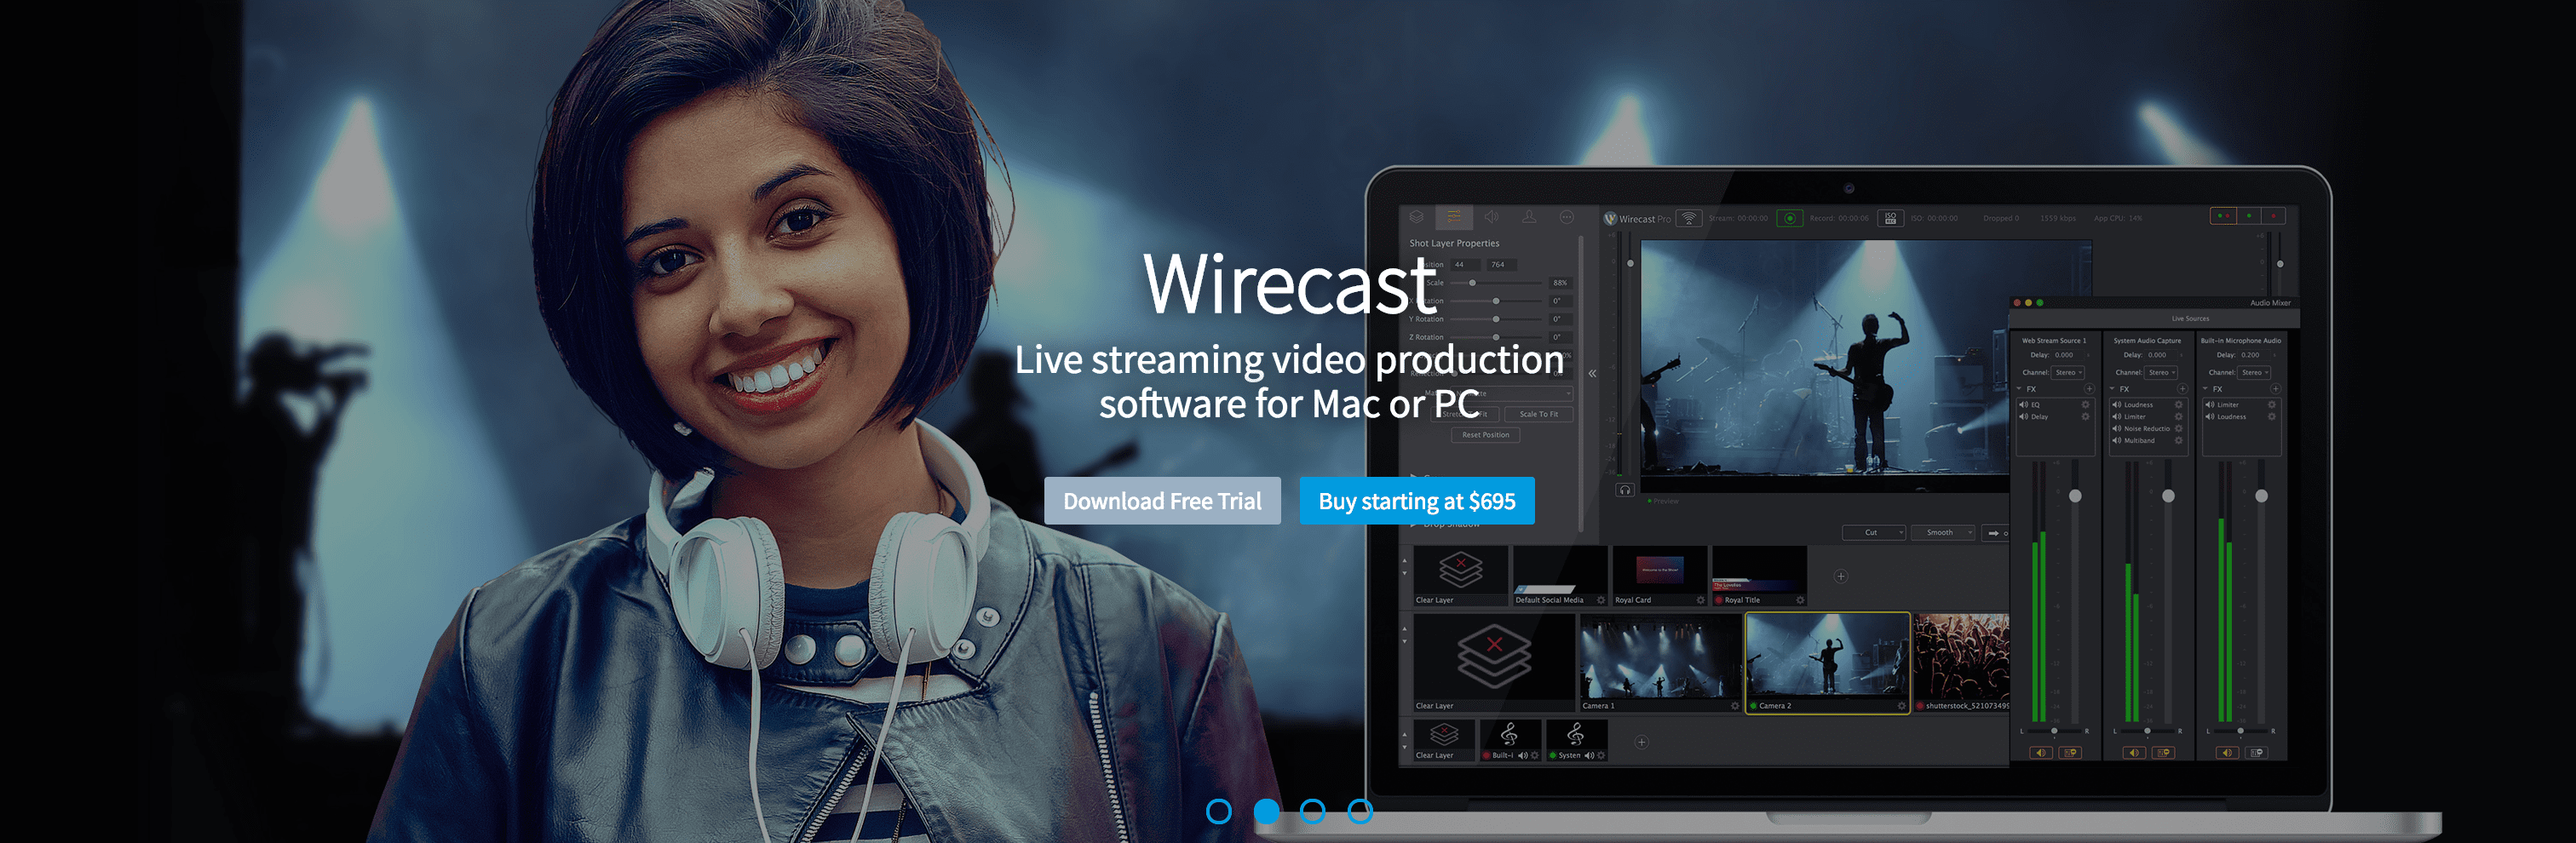 Live streaming software